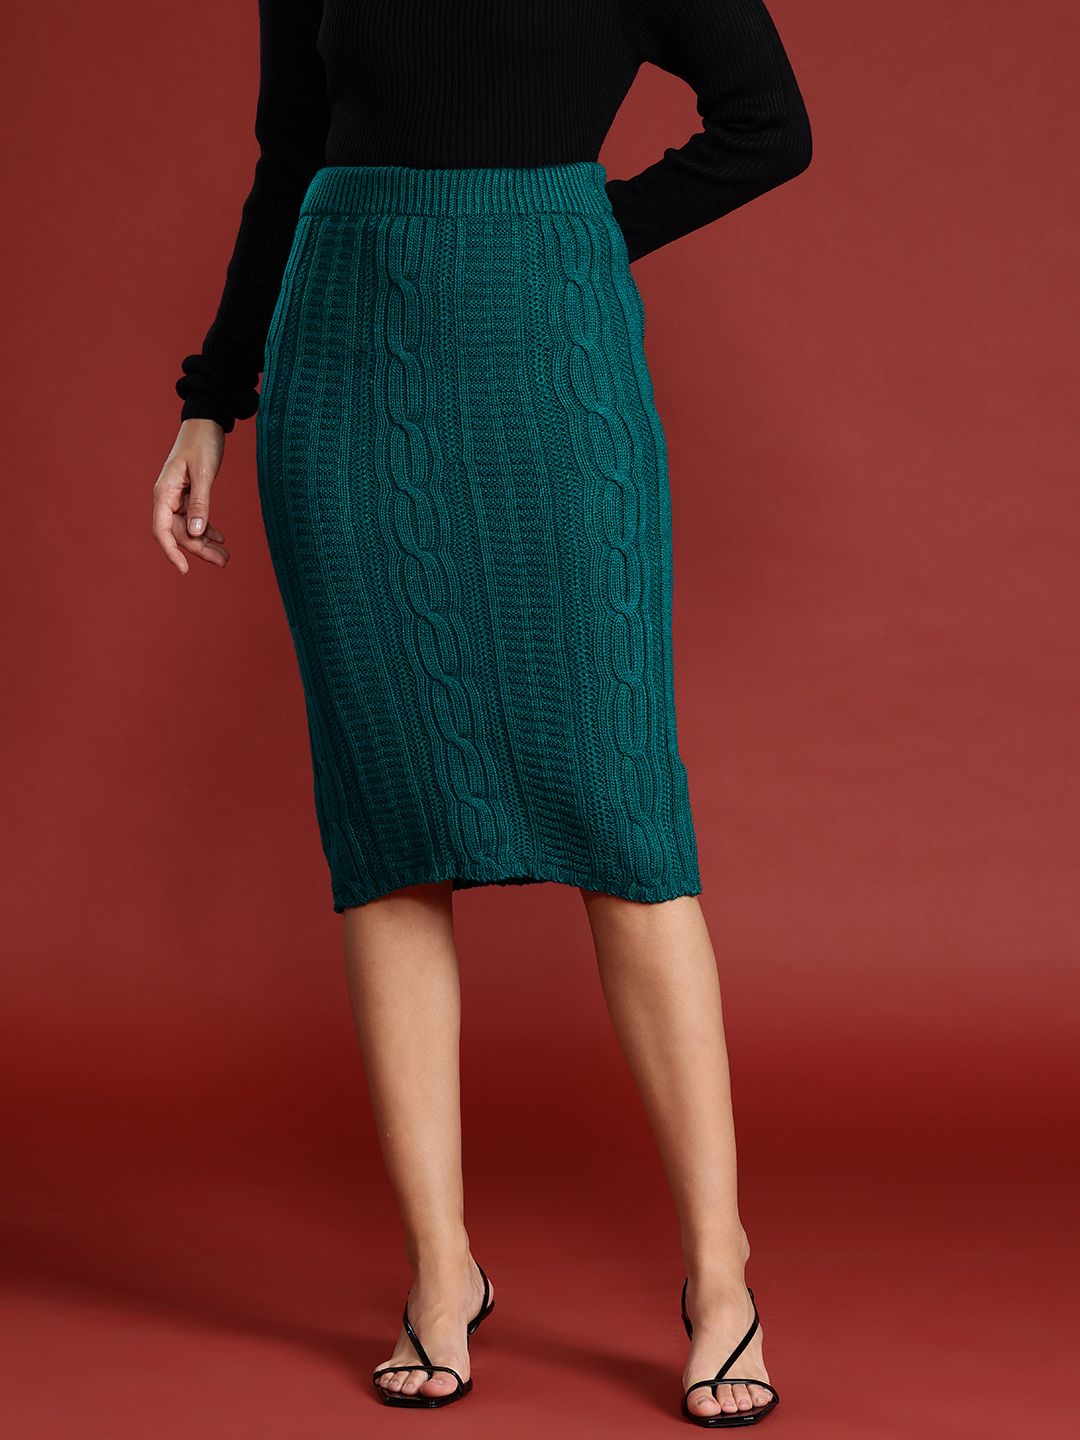 all about you Women Cable Knit Acrylic Pencil Skirt Price in India